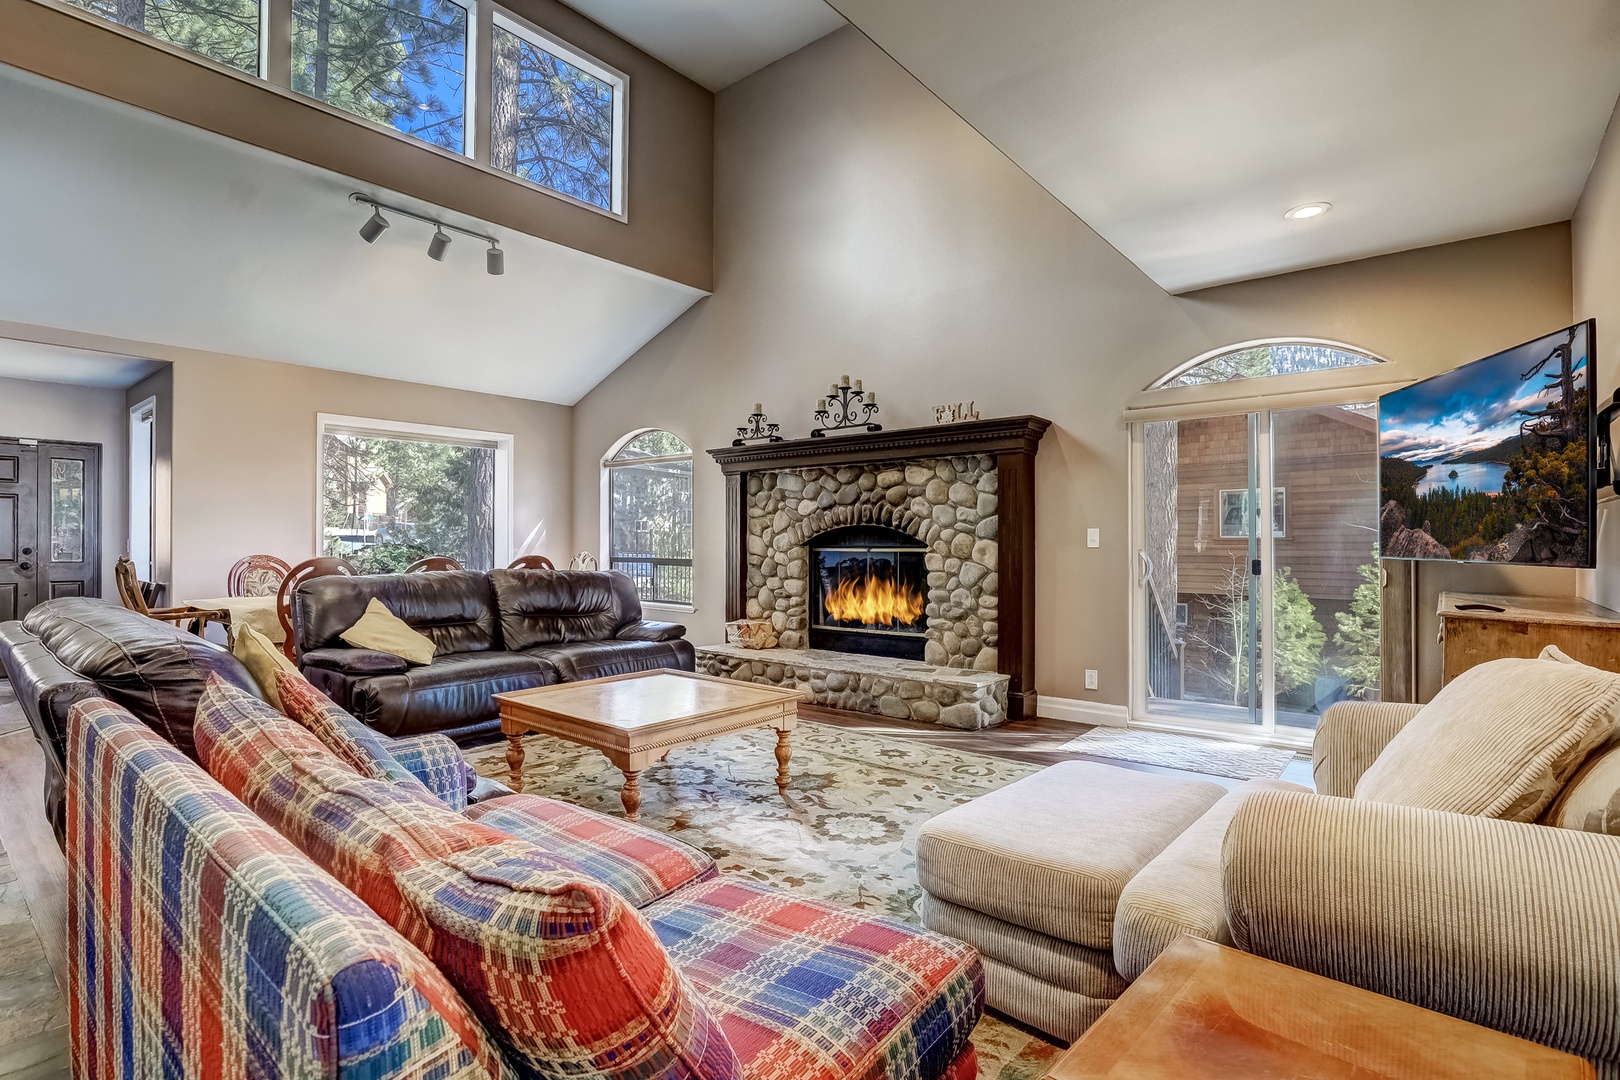 Living room with Samsung Smart TV, wood burning fireplace, and plenty of seating